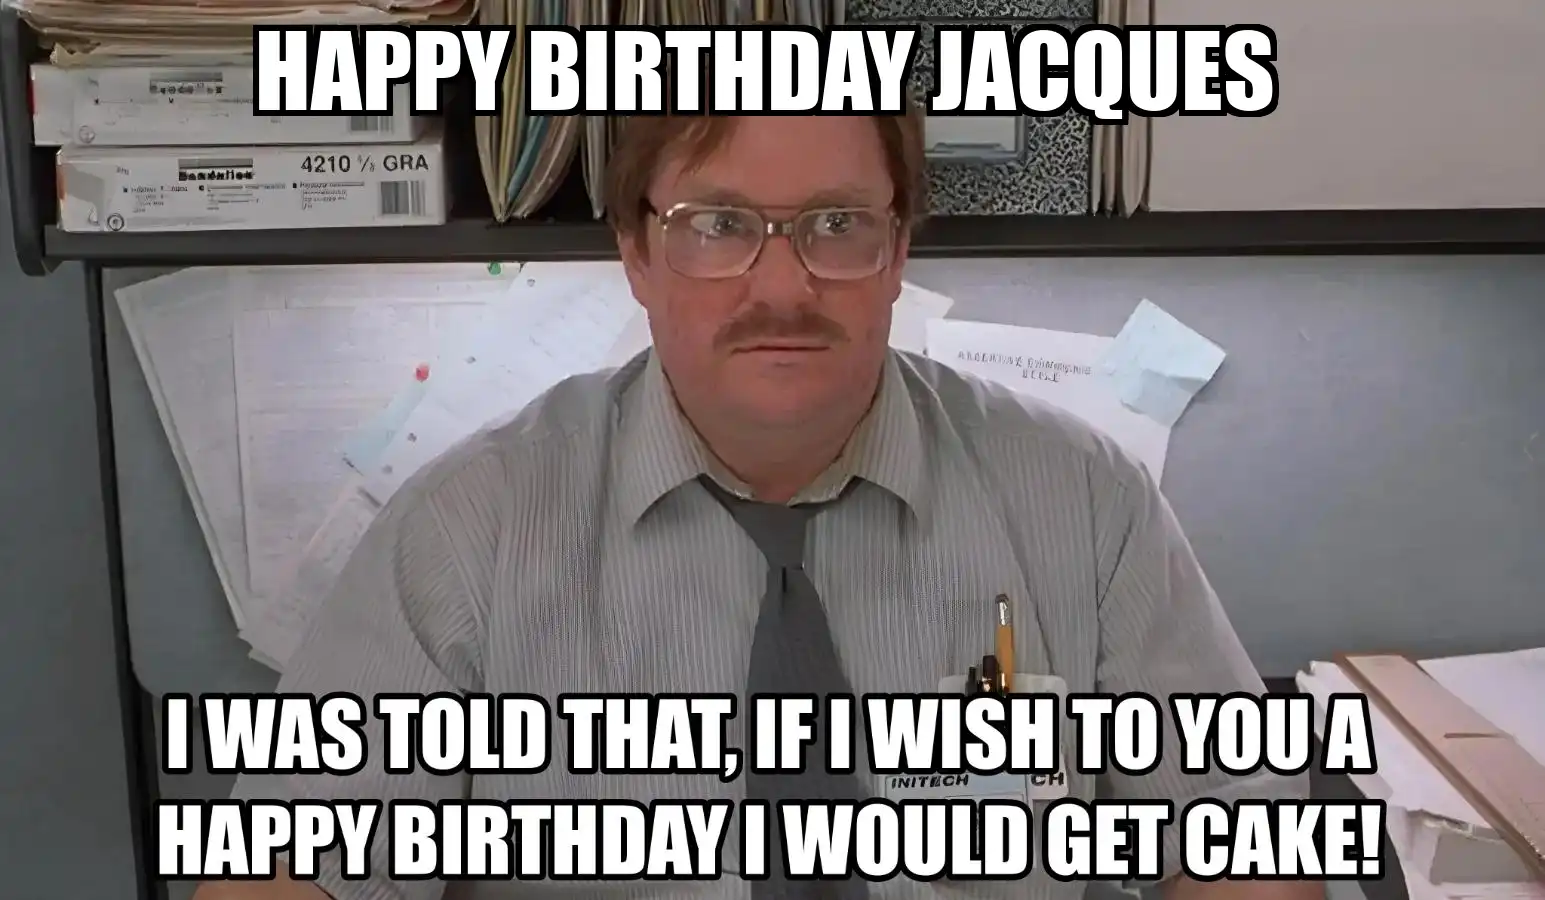 Happy Birthday Jacques I Would Get A Cake Meme